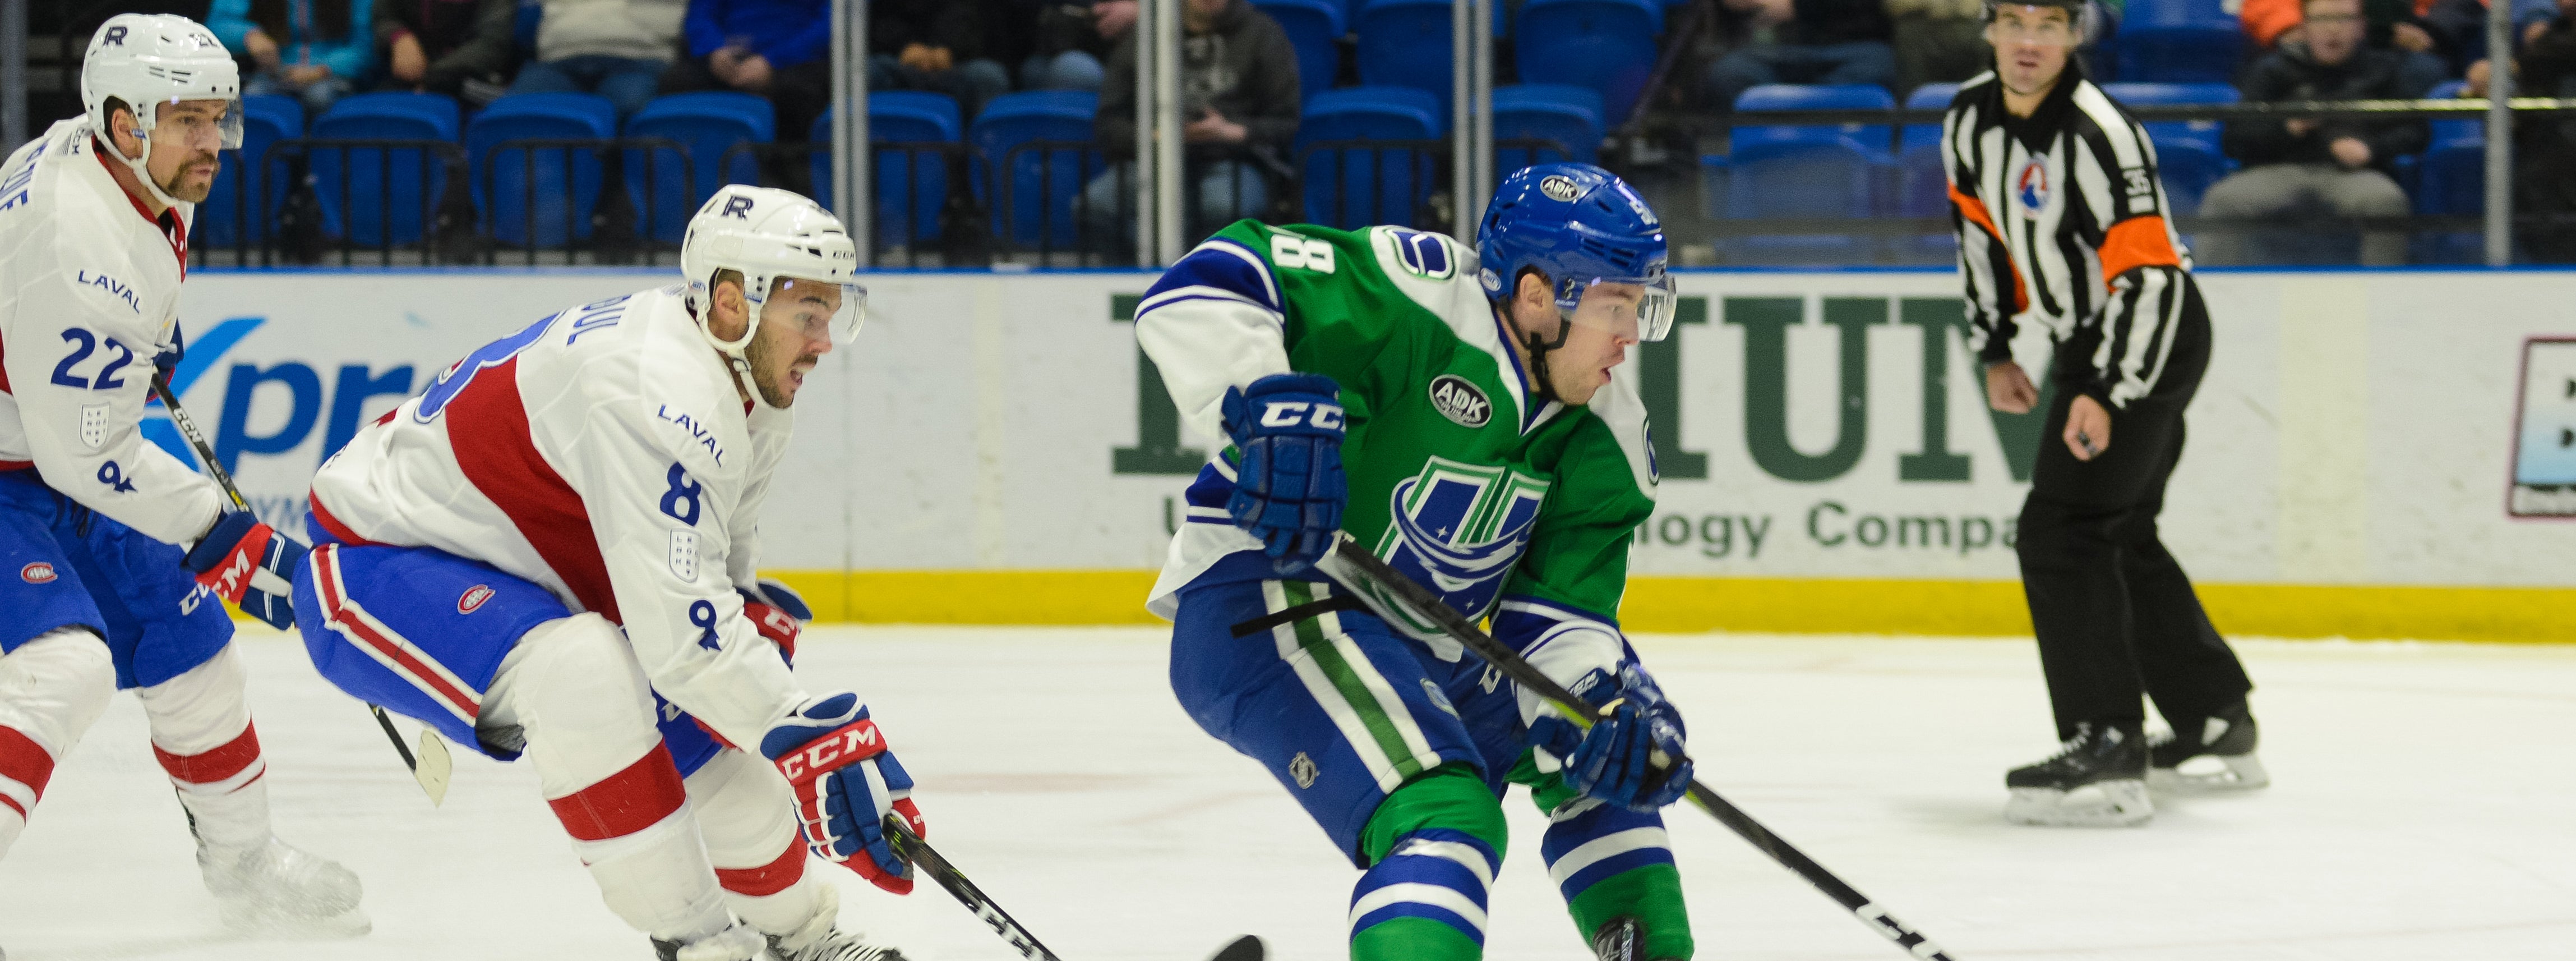 COMETS FACE ROCKET IN SATURDAY MATINEE